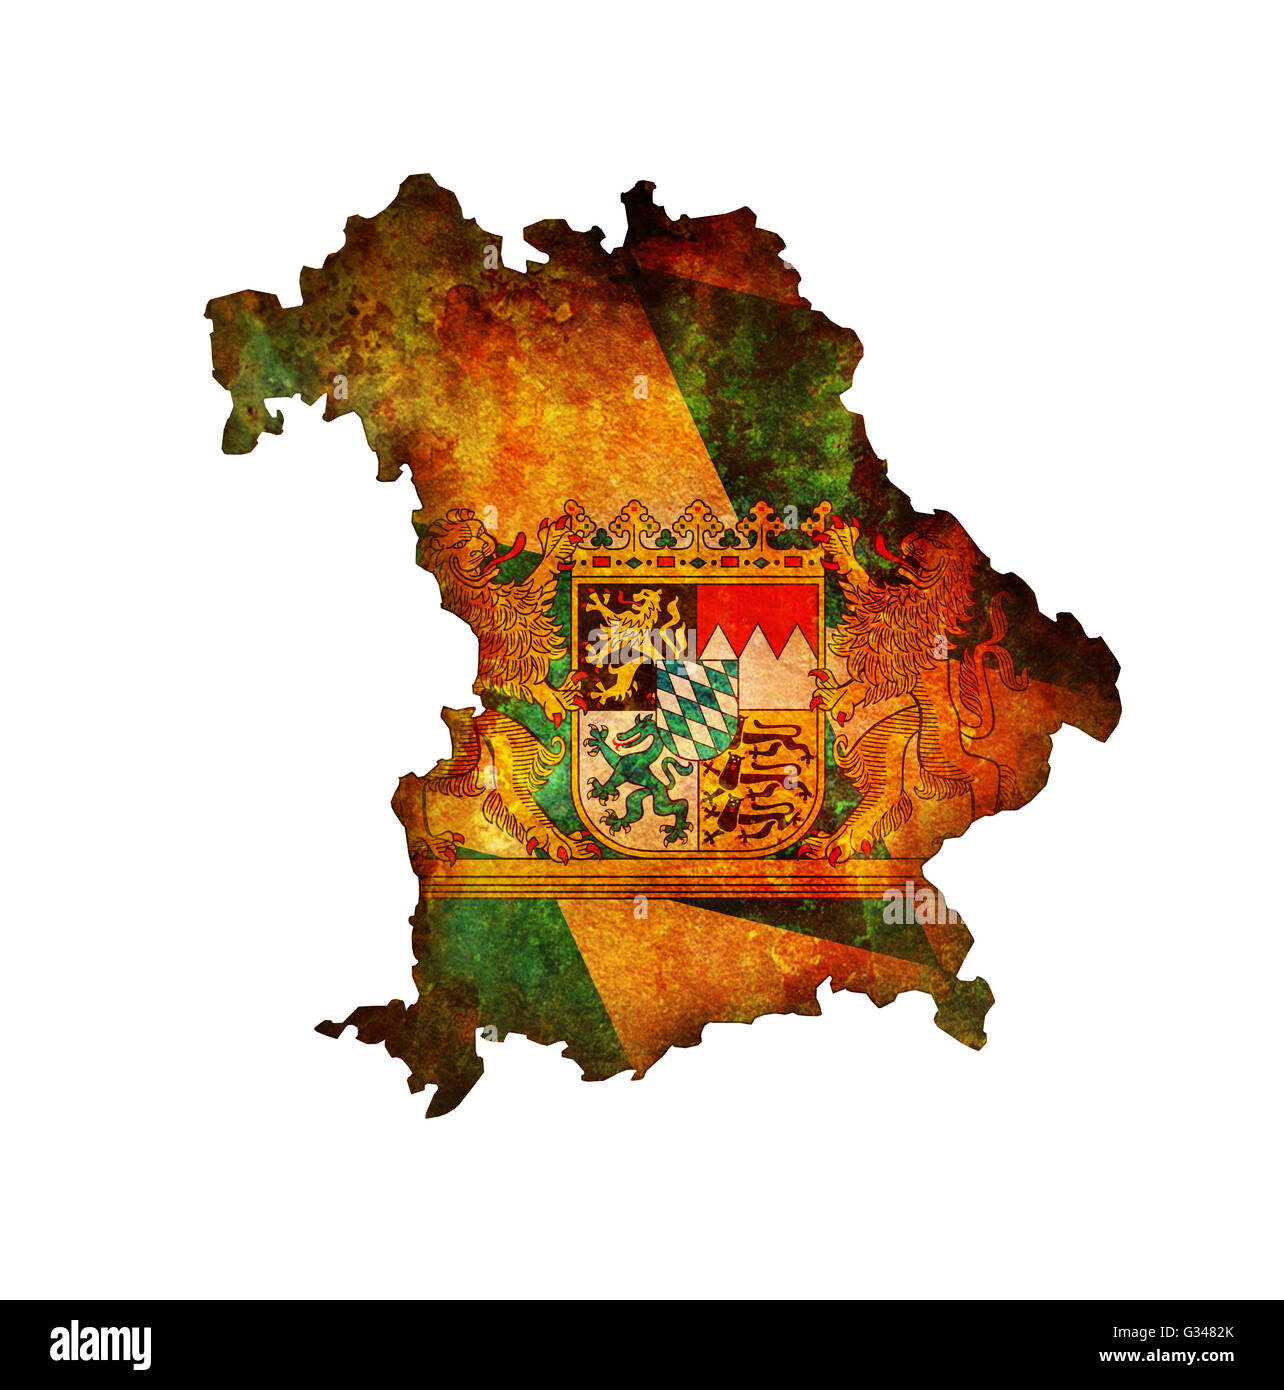 isolated map of bavaria region with flag Stock Photo